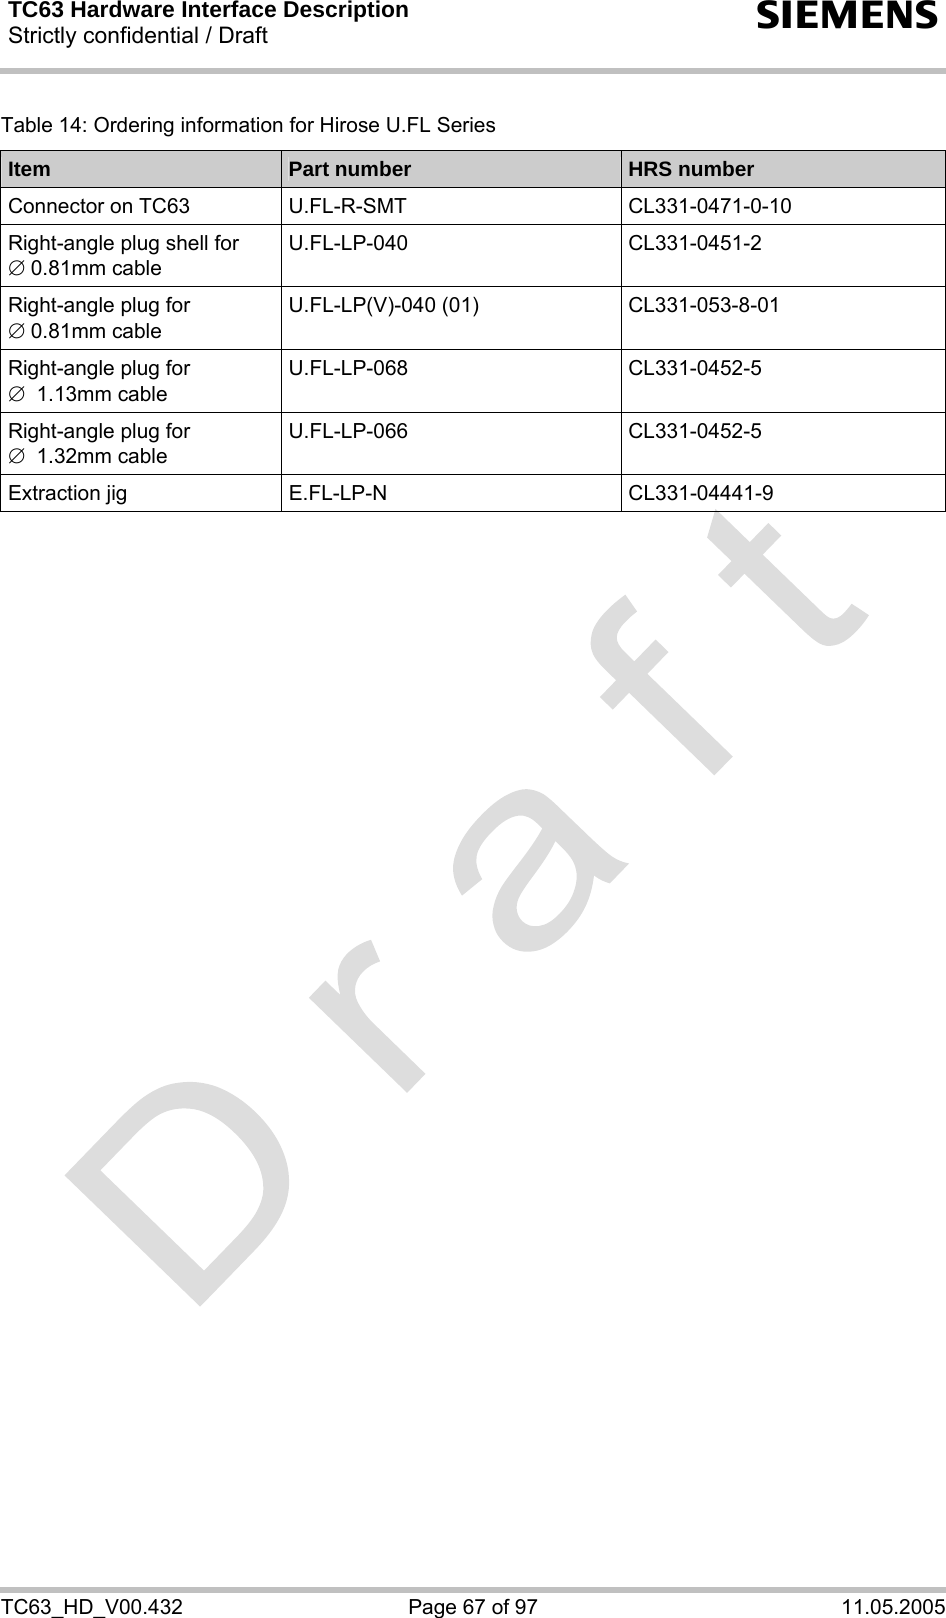 TC63 Hardware Interface Description Strictly confidential / Draft  s TC63_HD_V00.432  Page 67 of 97  11.05.2005 Table 14: Ordering information for Hirose U.FL Series Item  Part number   HRS number Connector on TC63  U.FL-R-SMT   CL331-0471-0-10 Right-angle plug shell for ∅ 0.81mm cable U.FL-LP-040 CL331-0451-2 Right-angle plug for  ∅ 0.81mm cable U.FL-LP(V)-040 (01)  CL331-053-8-01 Right-angle plug for  ∅  1.13mm cable U.FL-LP-068 CL331-0452-5 Right-angle plug for  ∅  1.32mm cable U.FL-LP-066 CL331-0452-5 Extraction jig  E.FL-LP-N  CL331-04441-9      